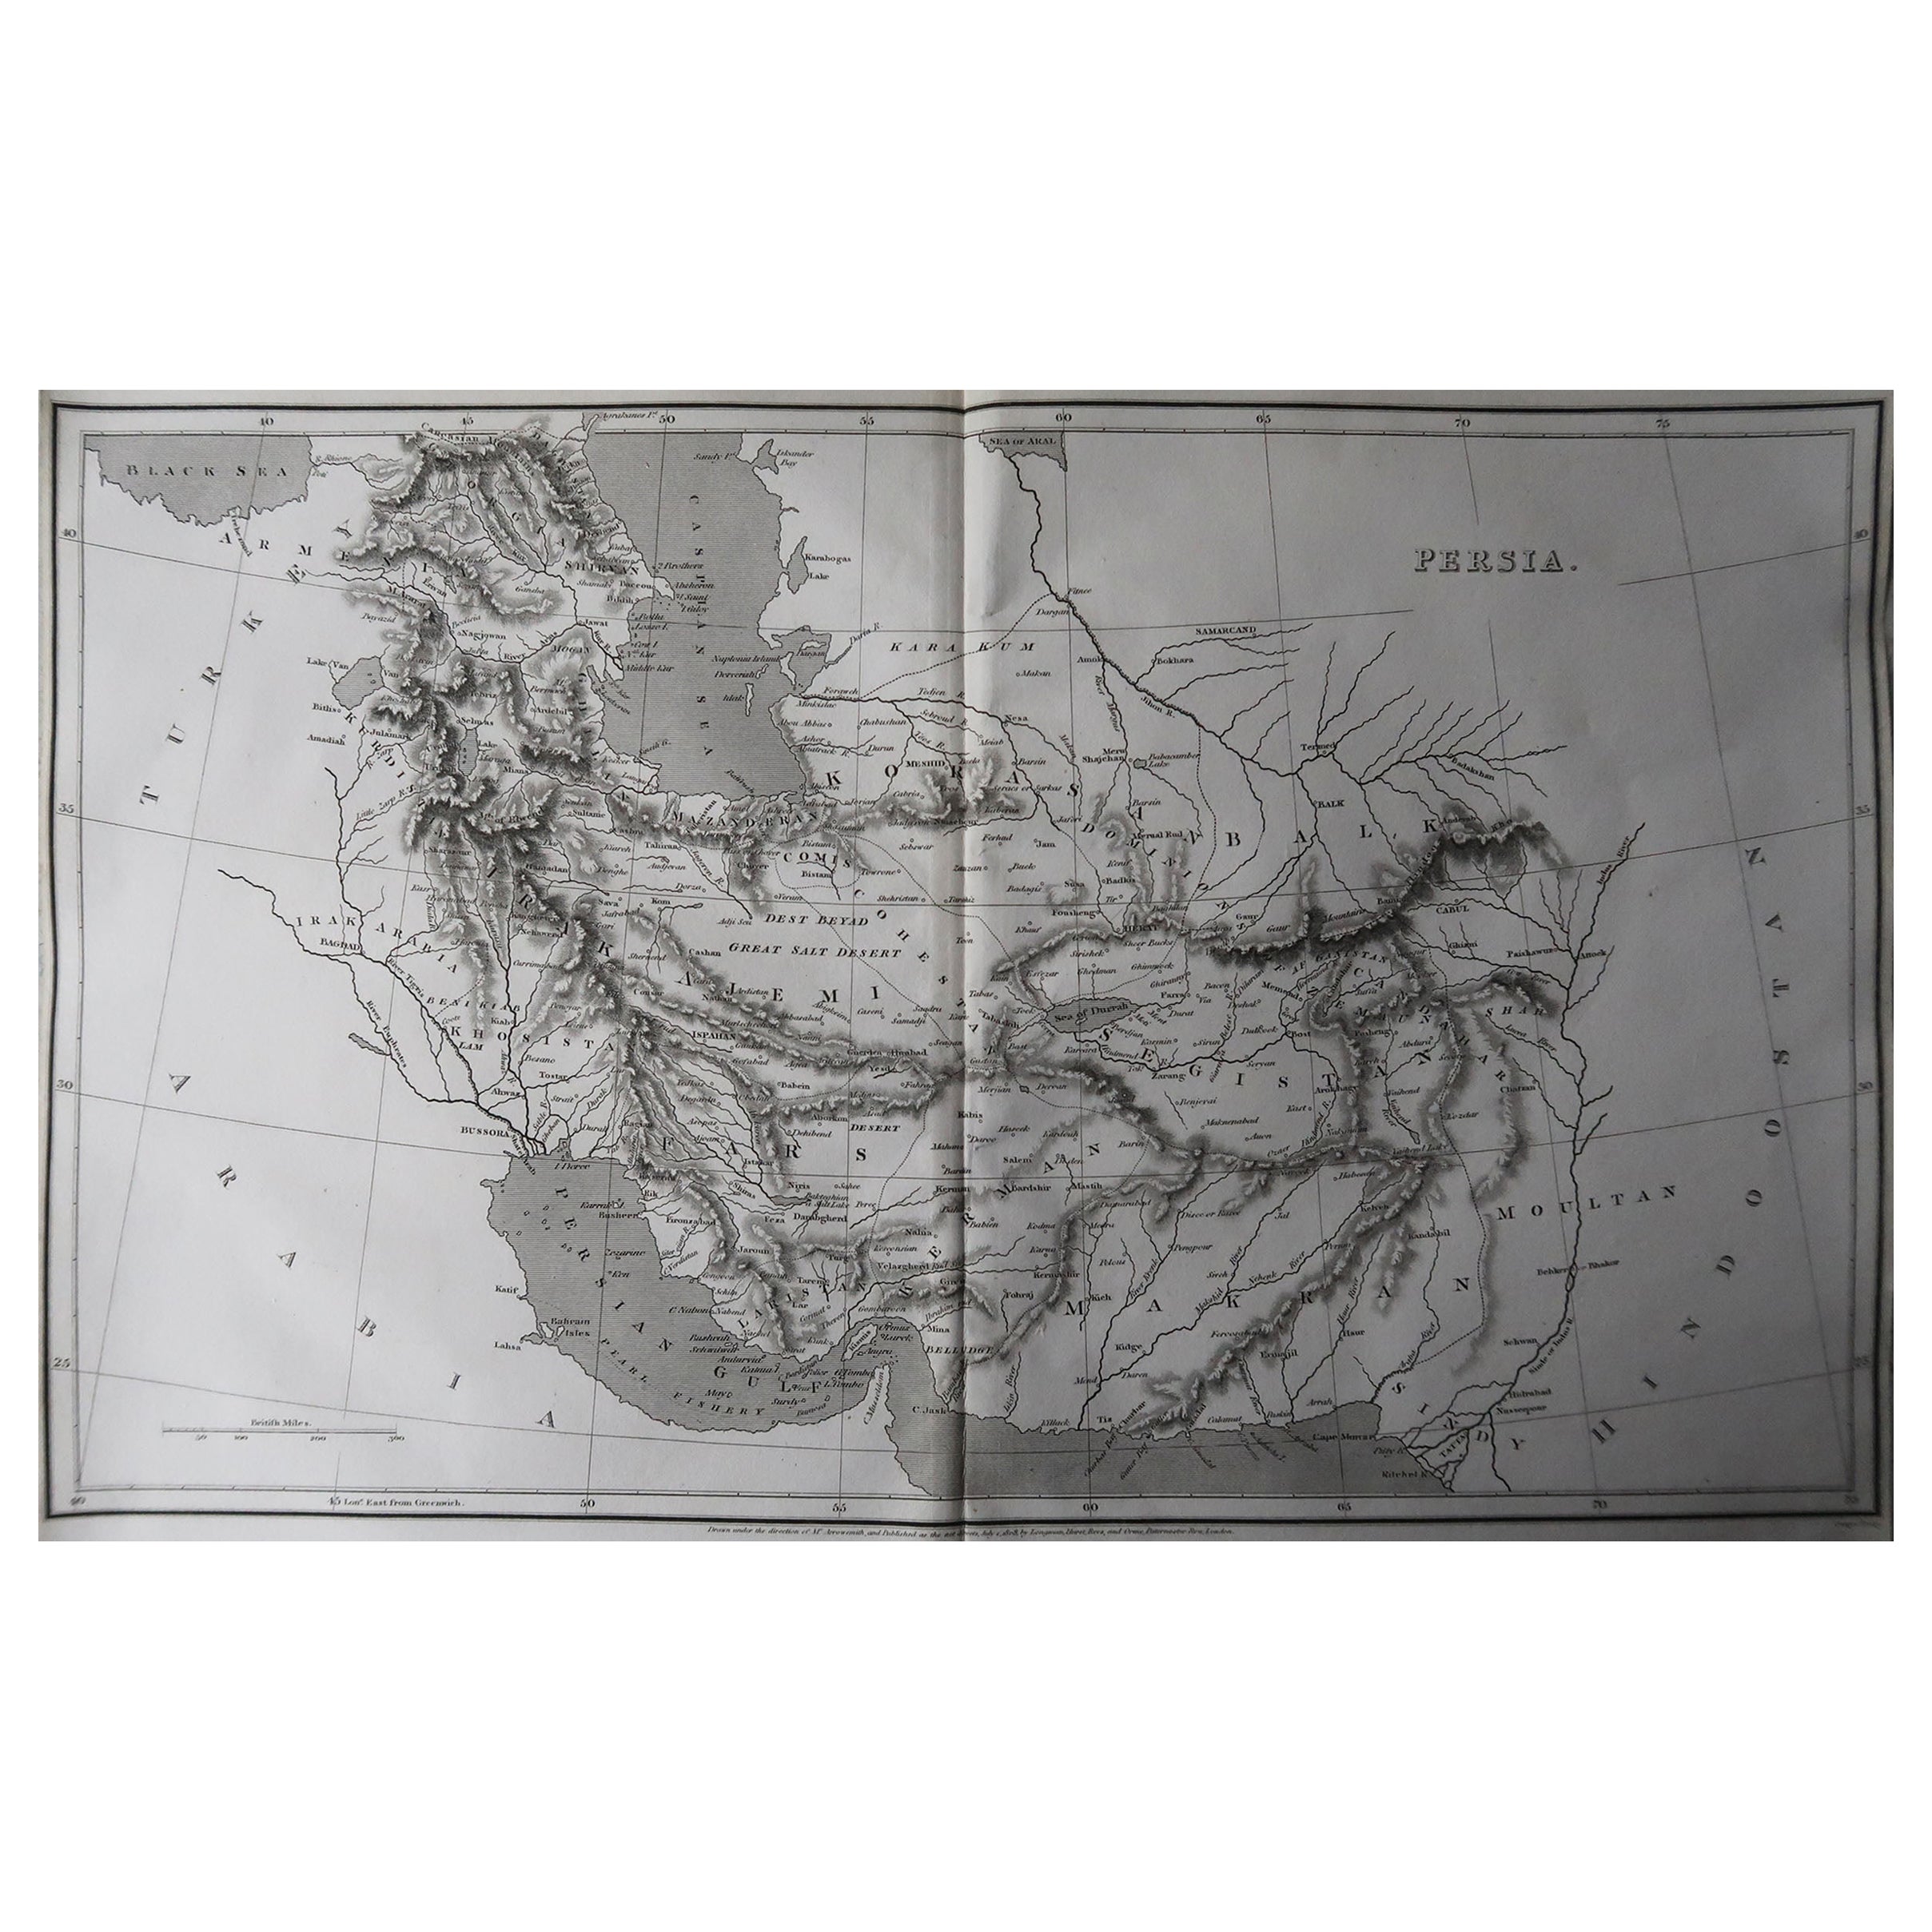 Great map of Iran

Drawn under the direction of Arrowsmith

Copper-plate engraving

Published by Longman, Hurst, Rees, Orme and Brown, 1820

Unframed.